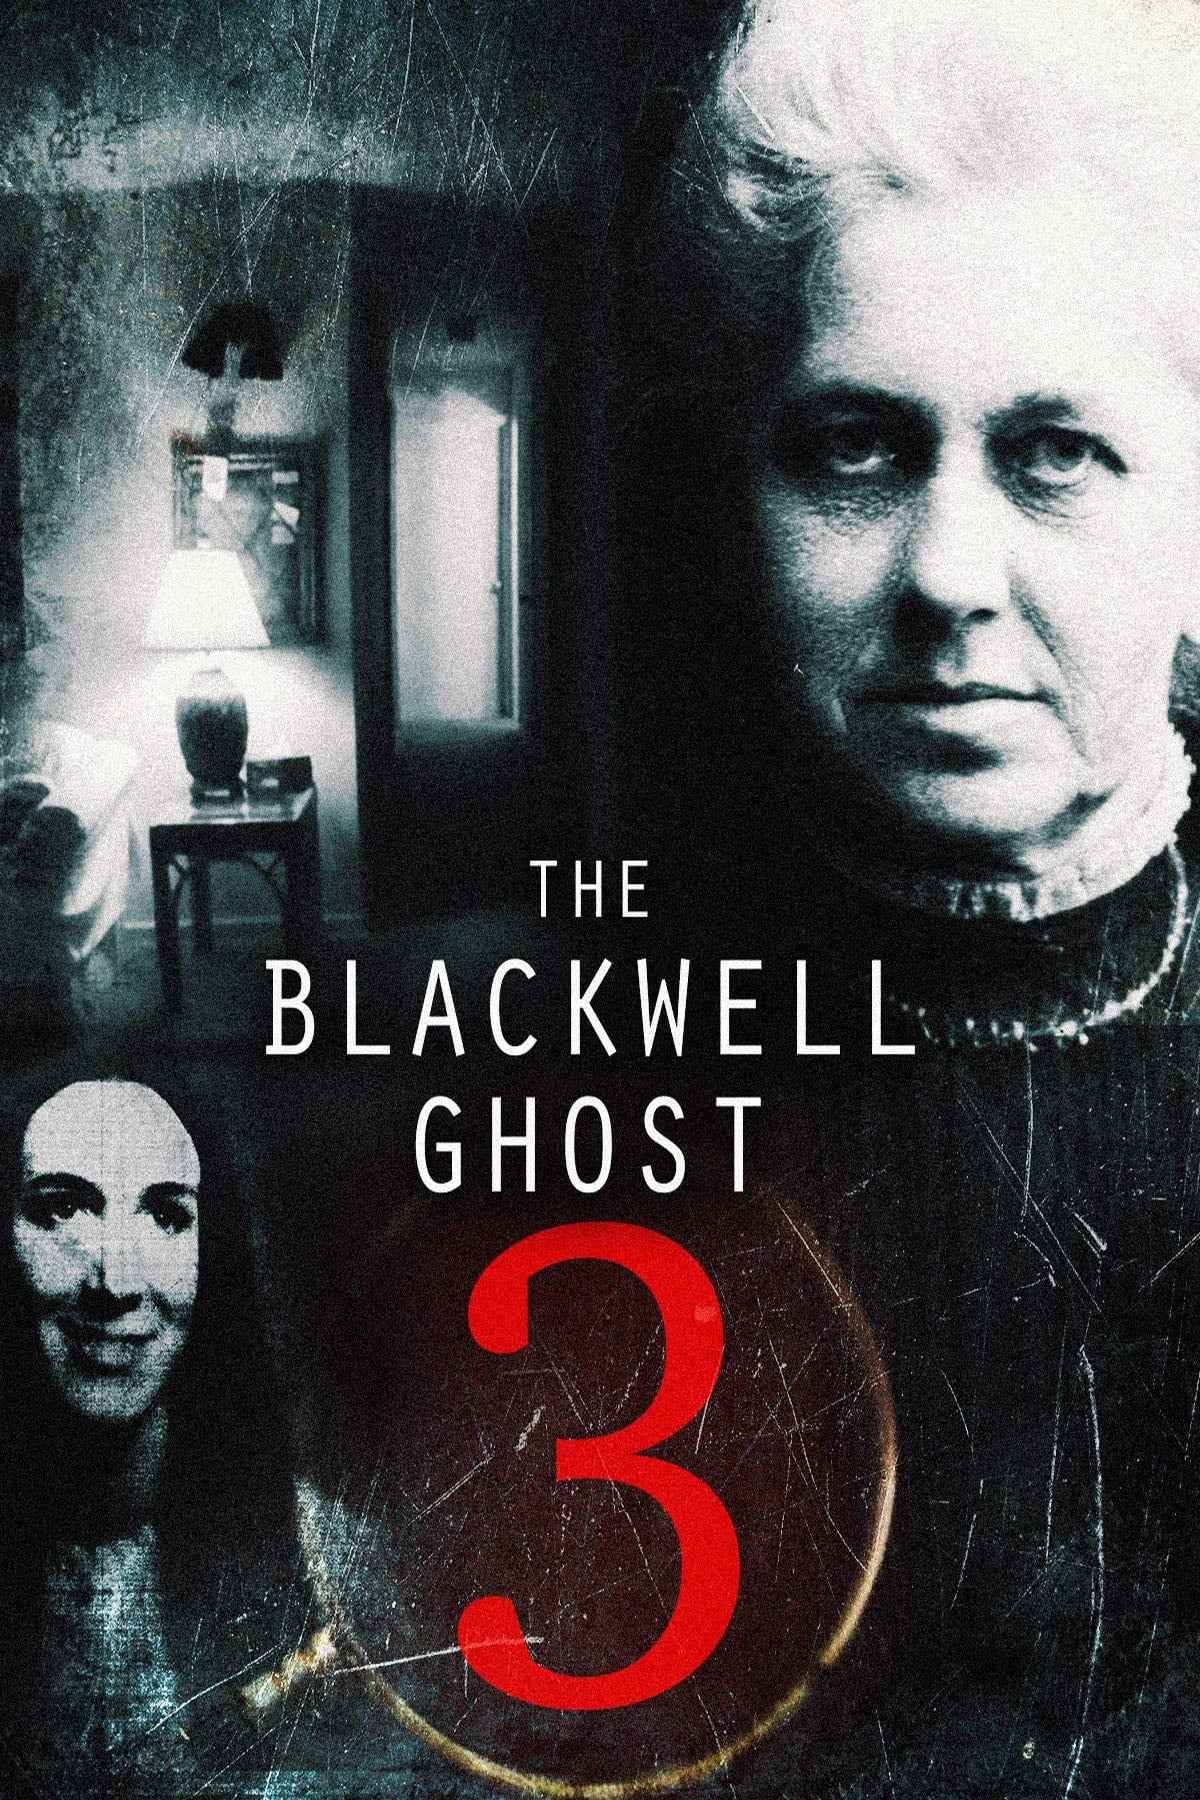 The Blackwell Ghost 3 Movie (2019) Release Date, Cast, Trailer, Songs